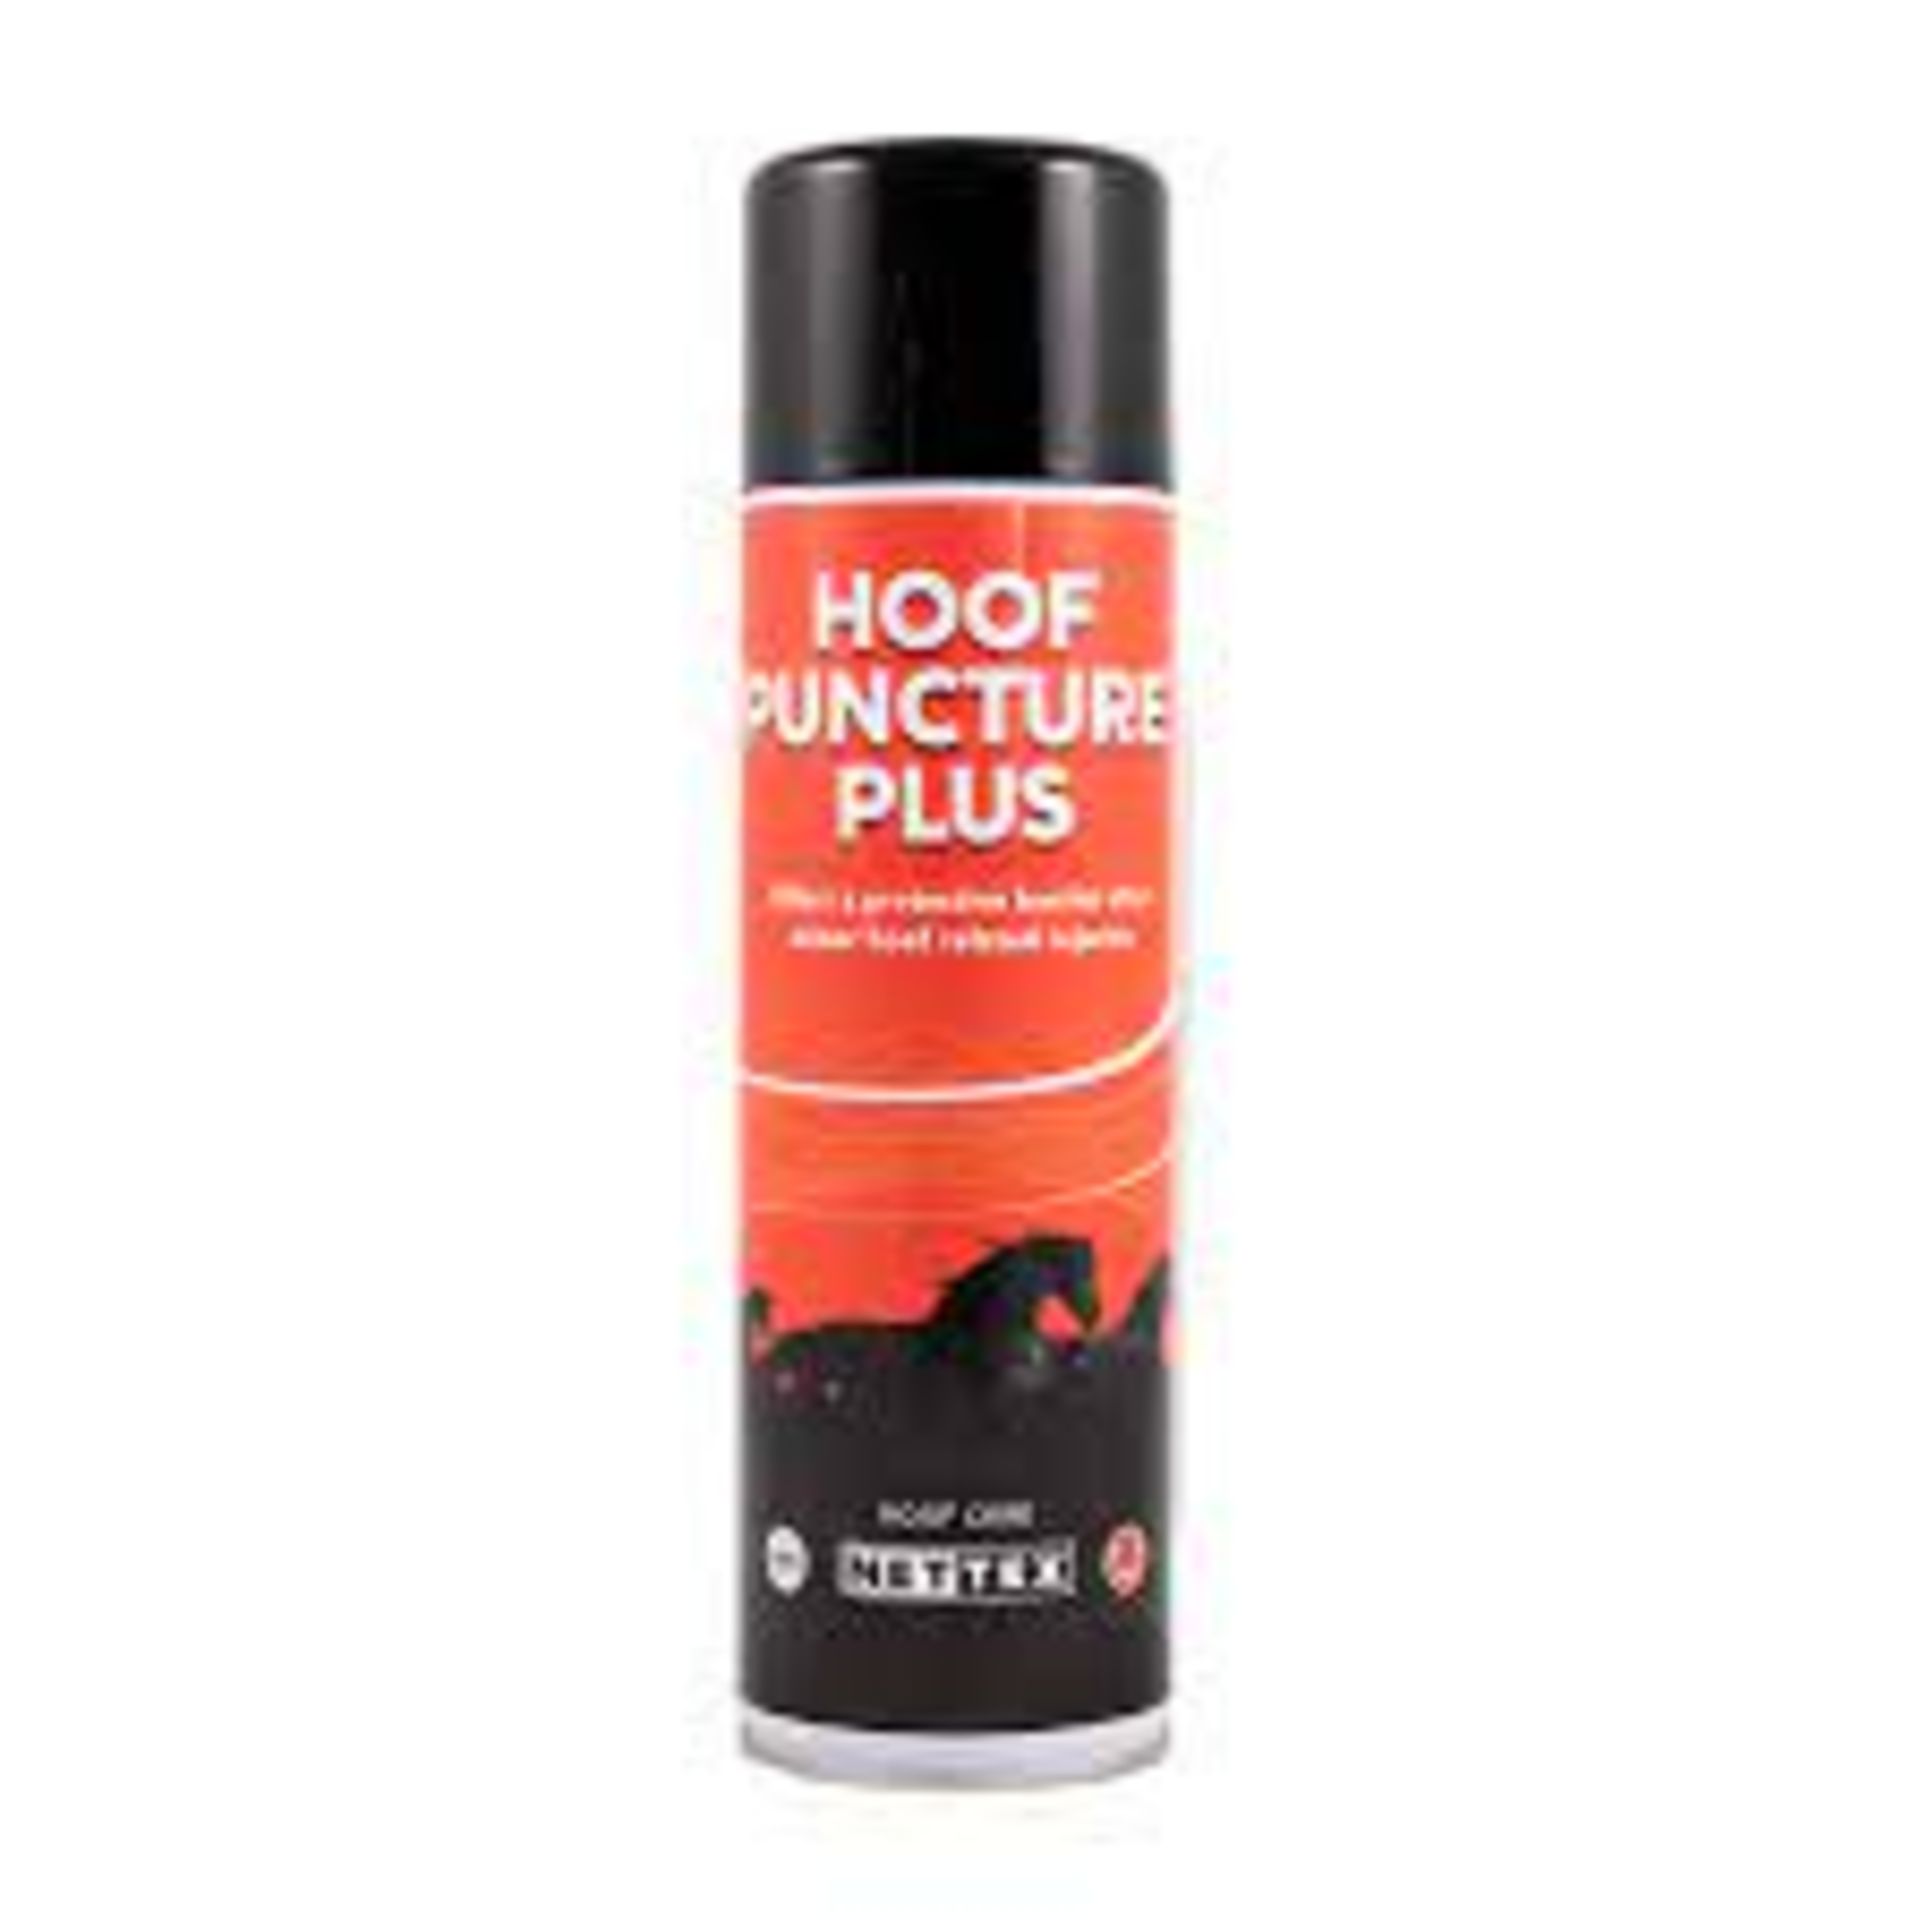 200 X BRAND NEW NETTEX HOOF PUNCTURE PLUS 500ML RRP £34 EACH, A highly efficient cleanser to help